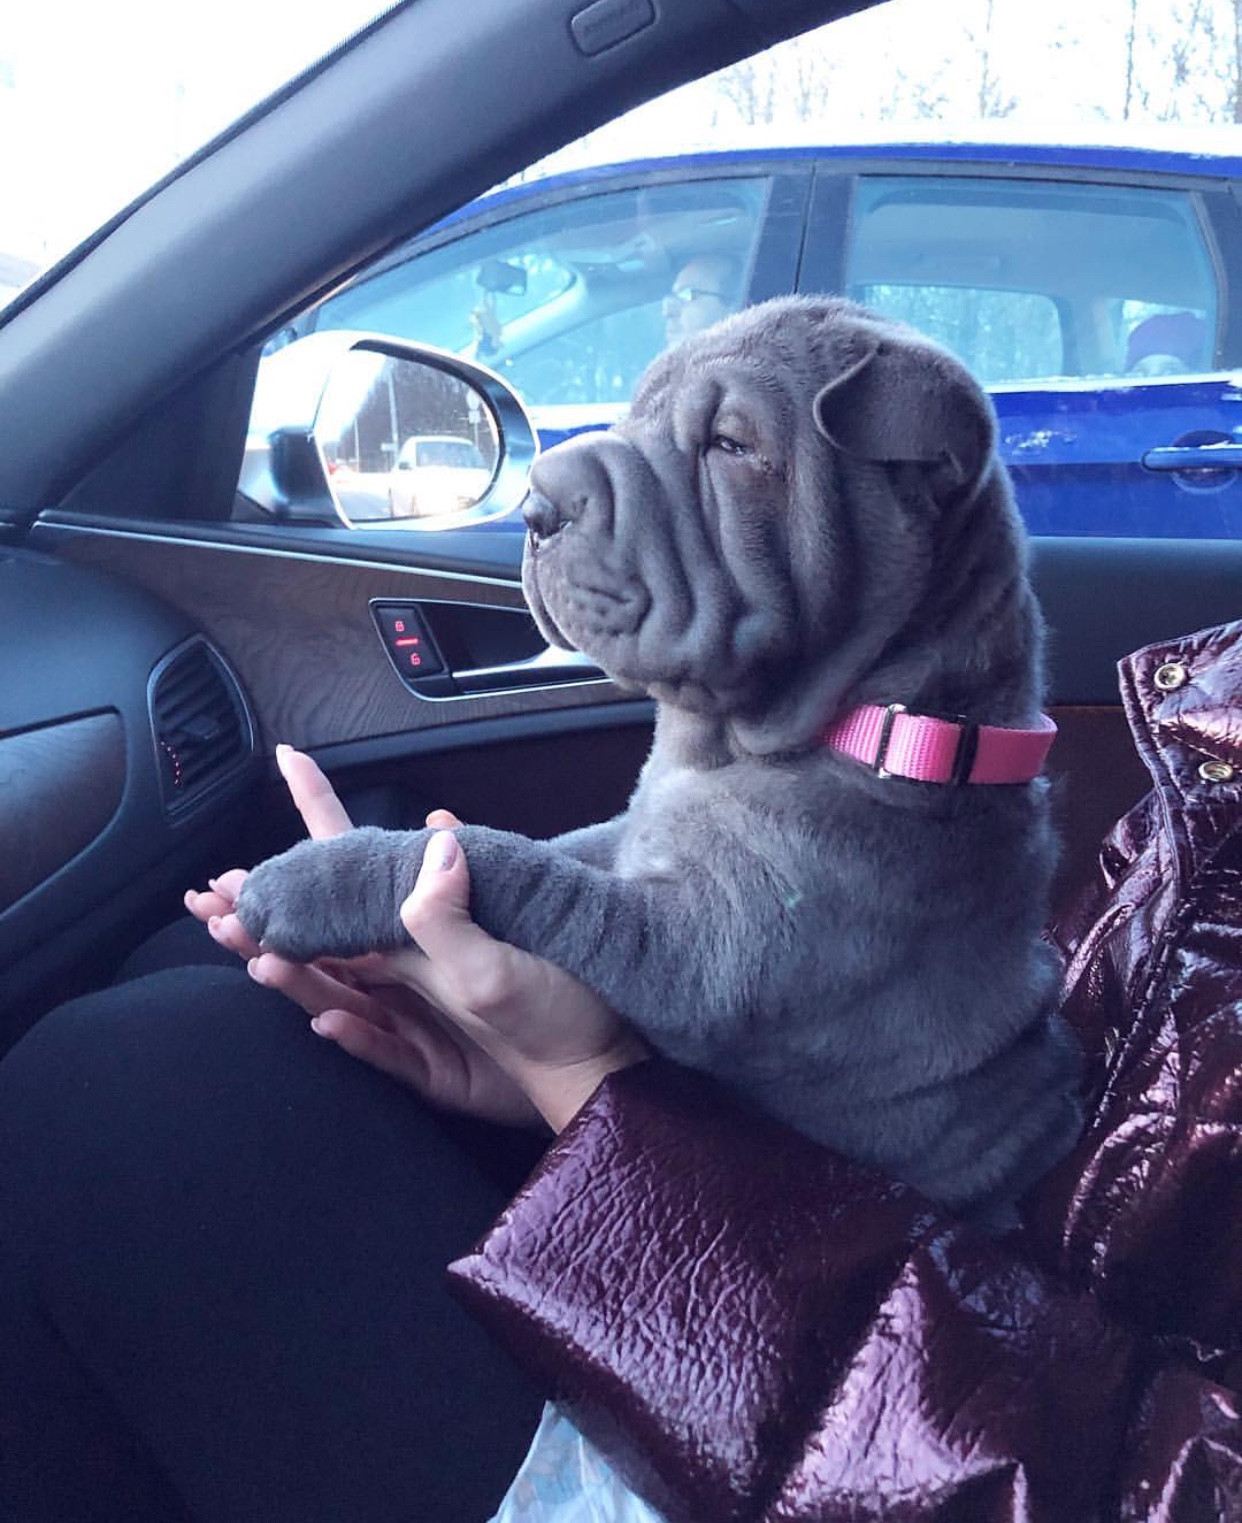 A Shar-Pei puppy sitting on the lap of a woman sitting in the passenger seat inside the car